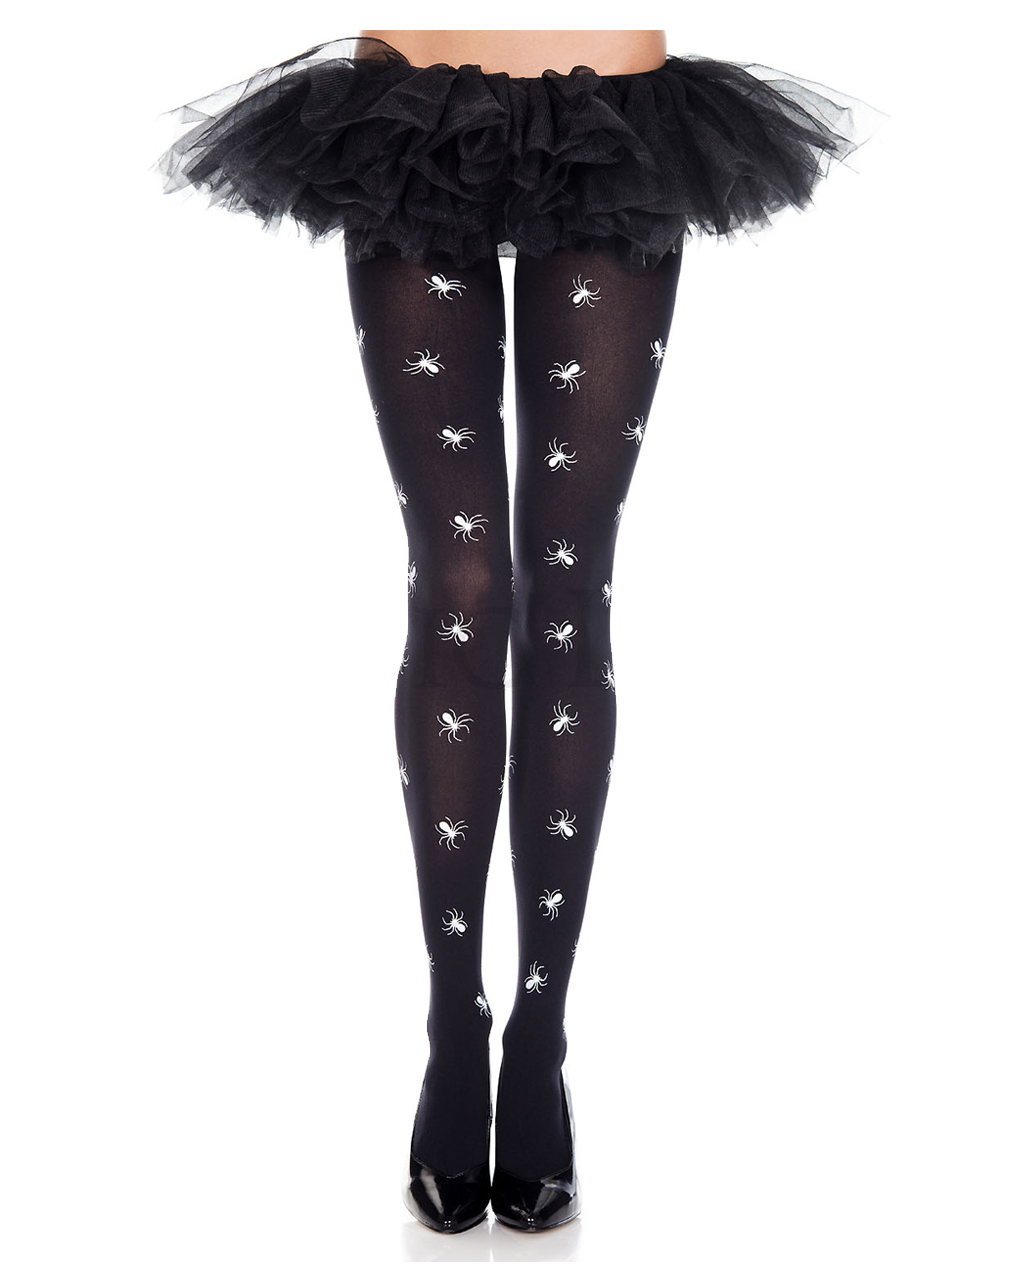 Black Tights With White Spiders 🎃 | Horror-Shop.com